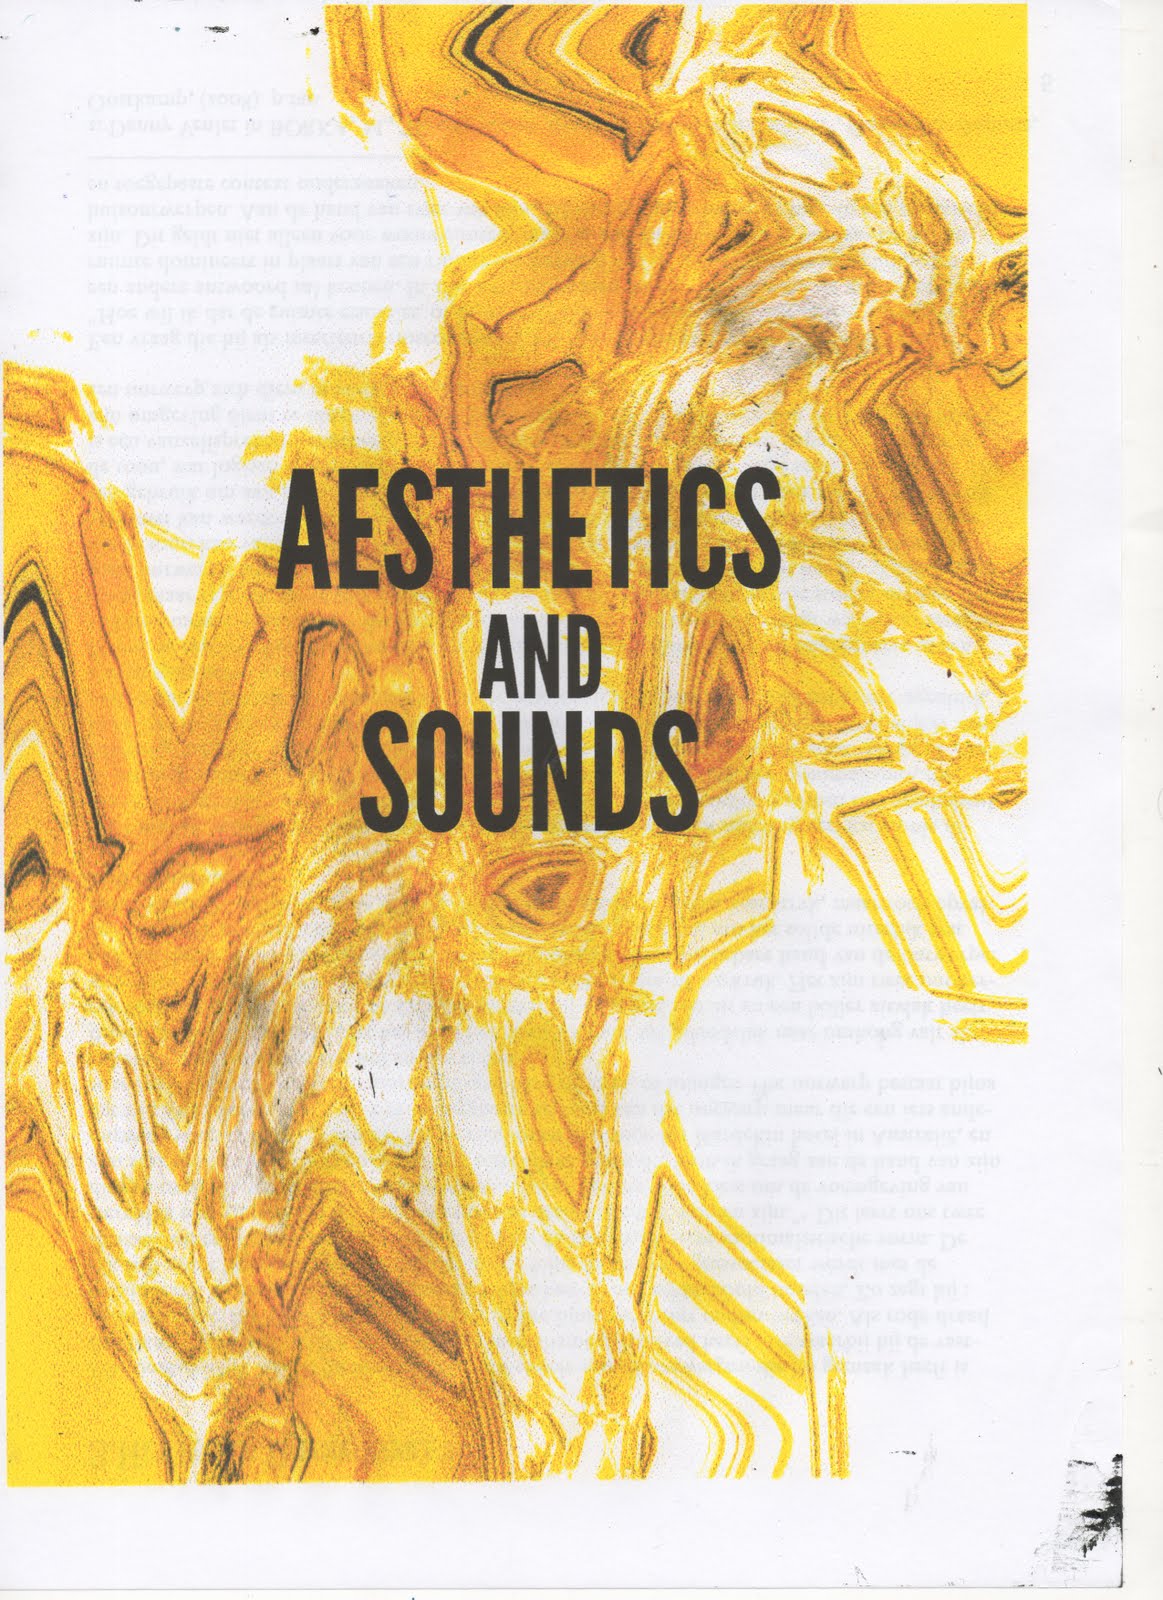 Aesthetics and Sounds